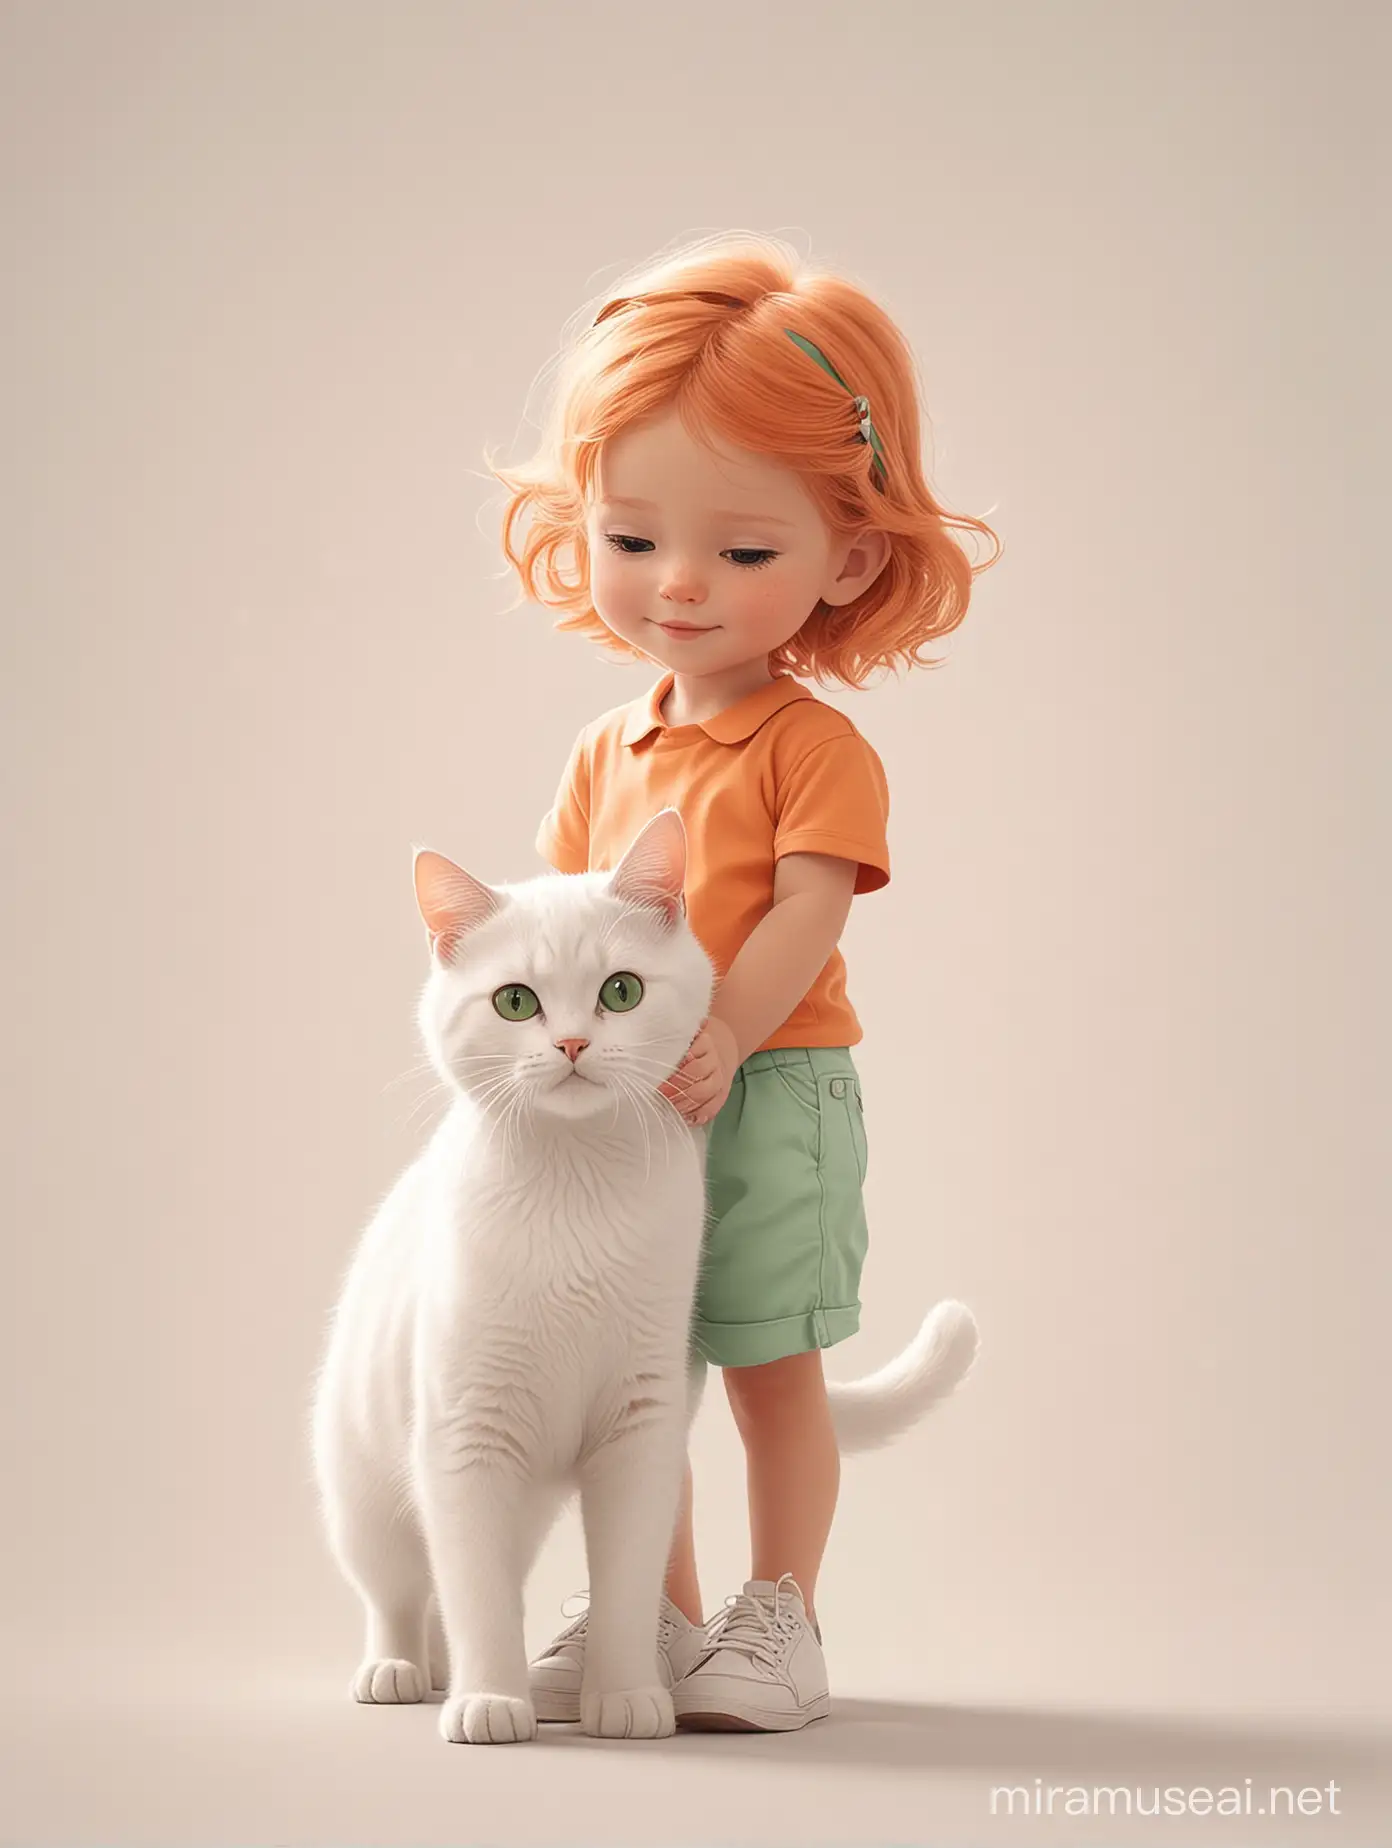 Adorable Child with Cat Disney Animation Style in Pastel Shades